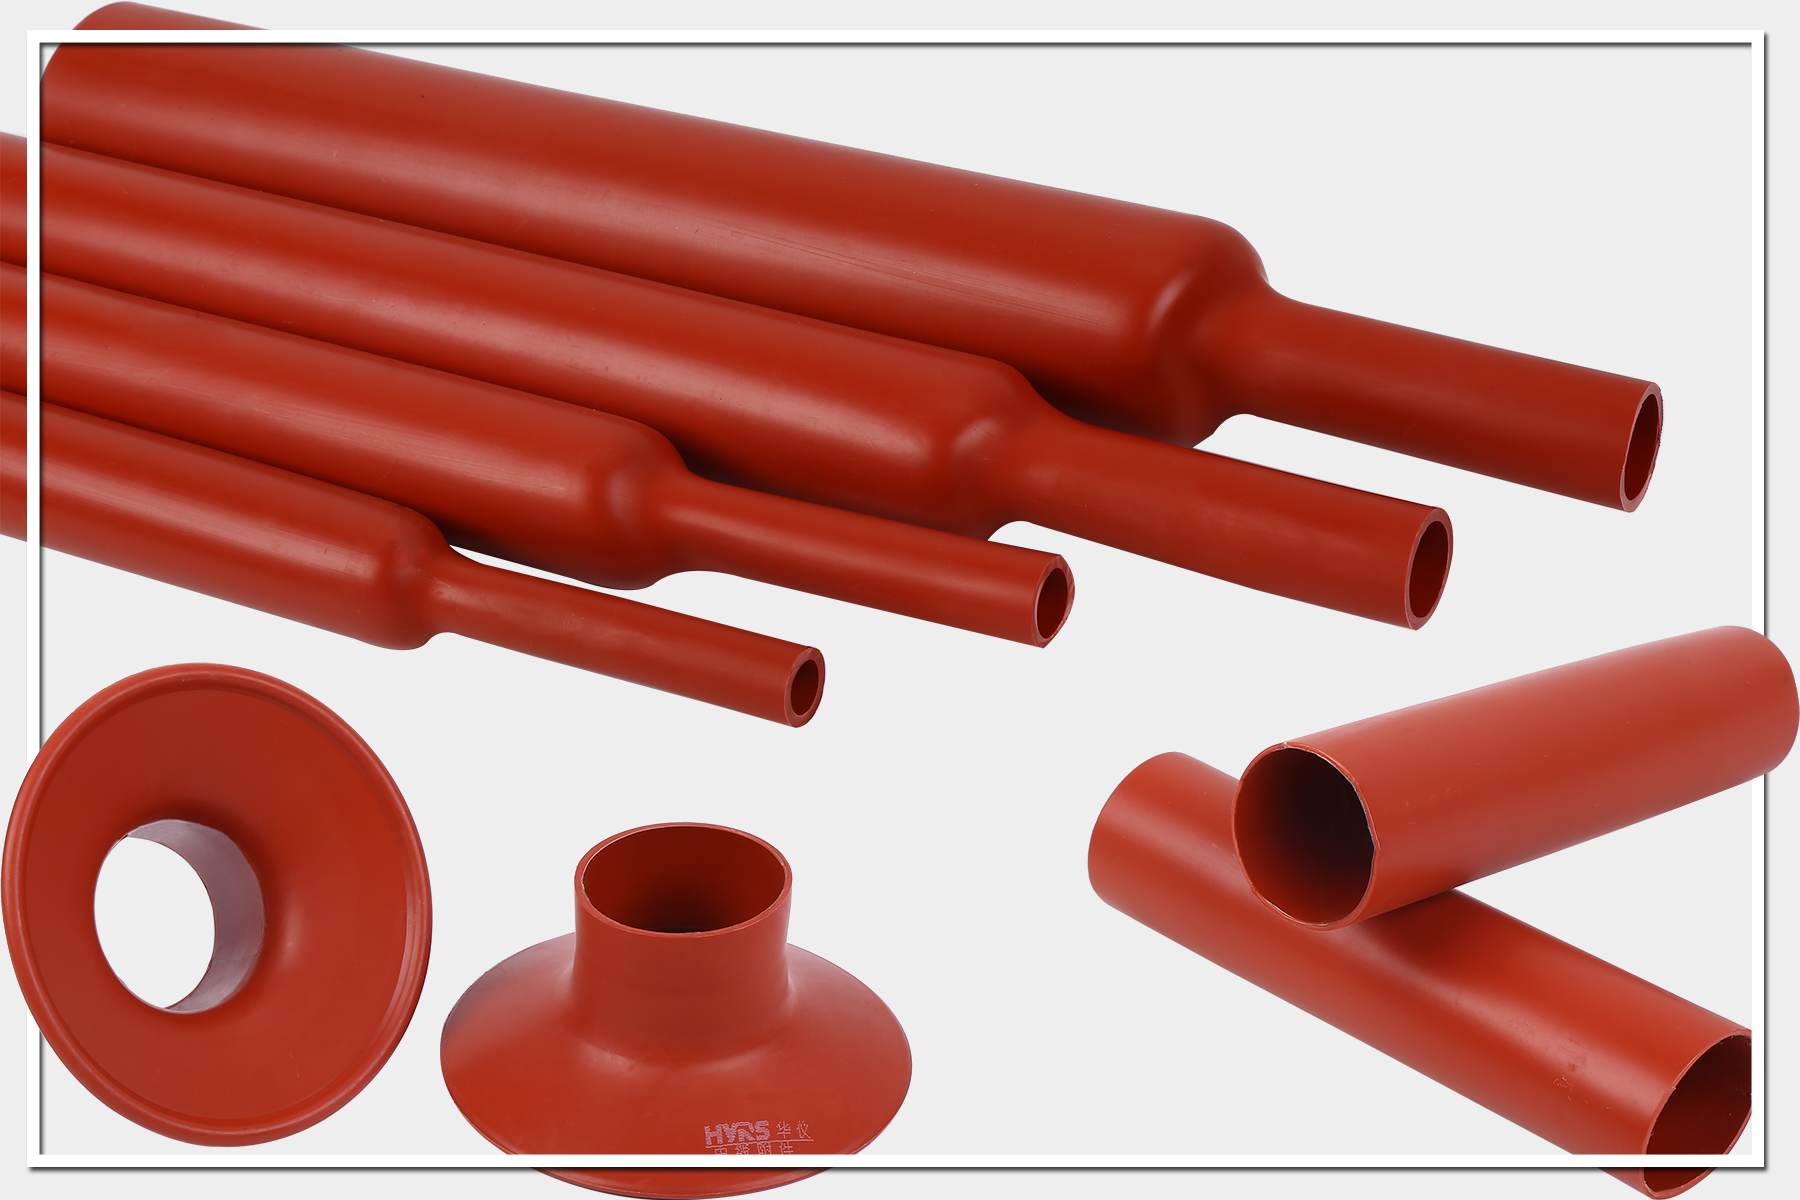 Features of Heat shrinkable cable accessories (Heat Shrinkable Series)